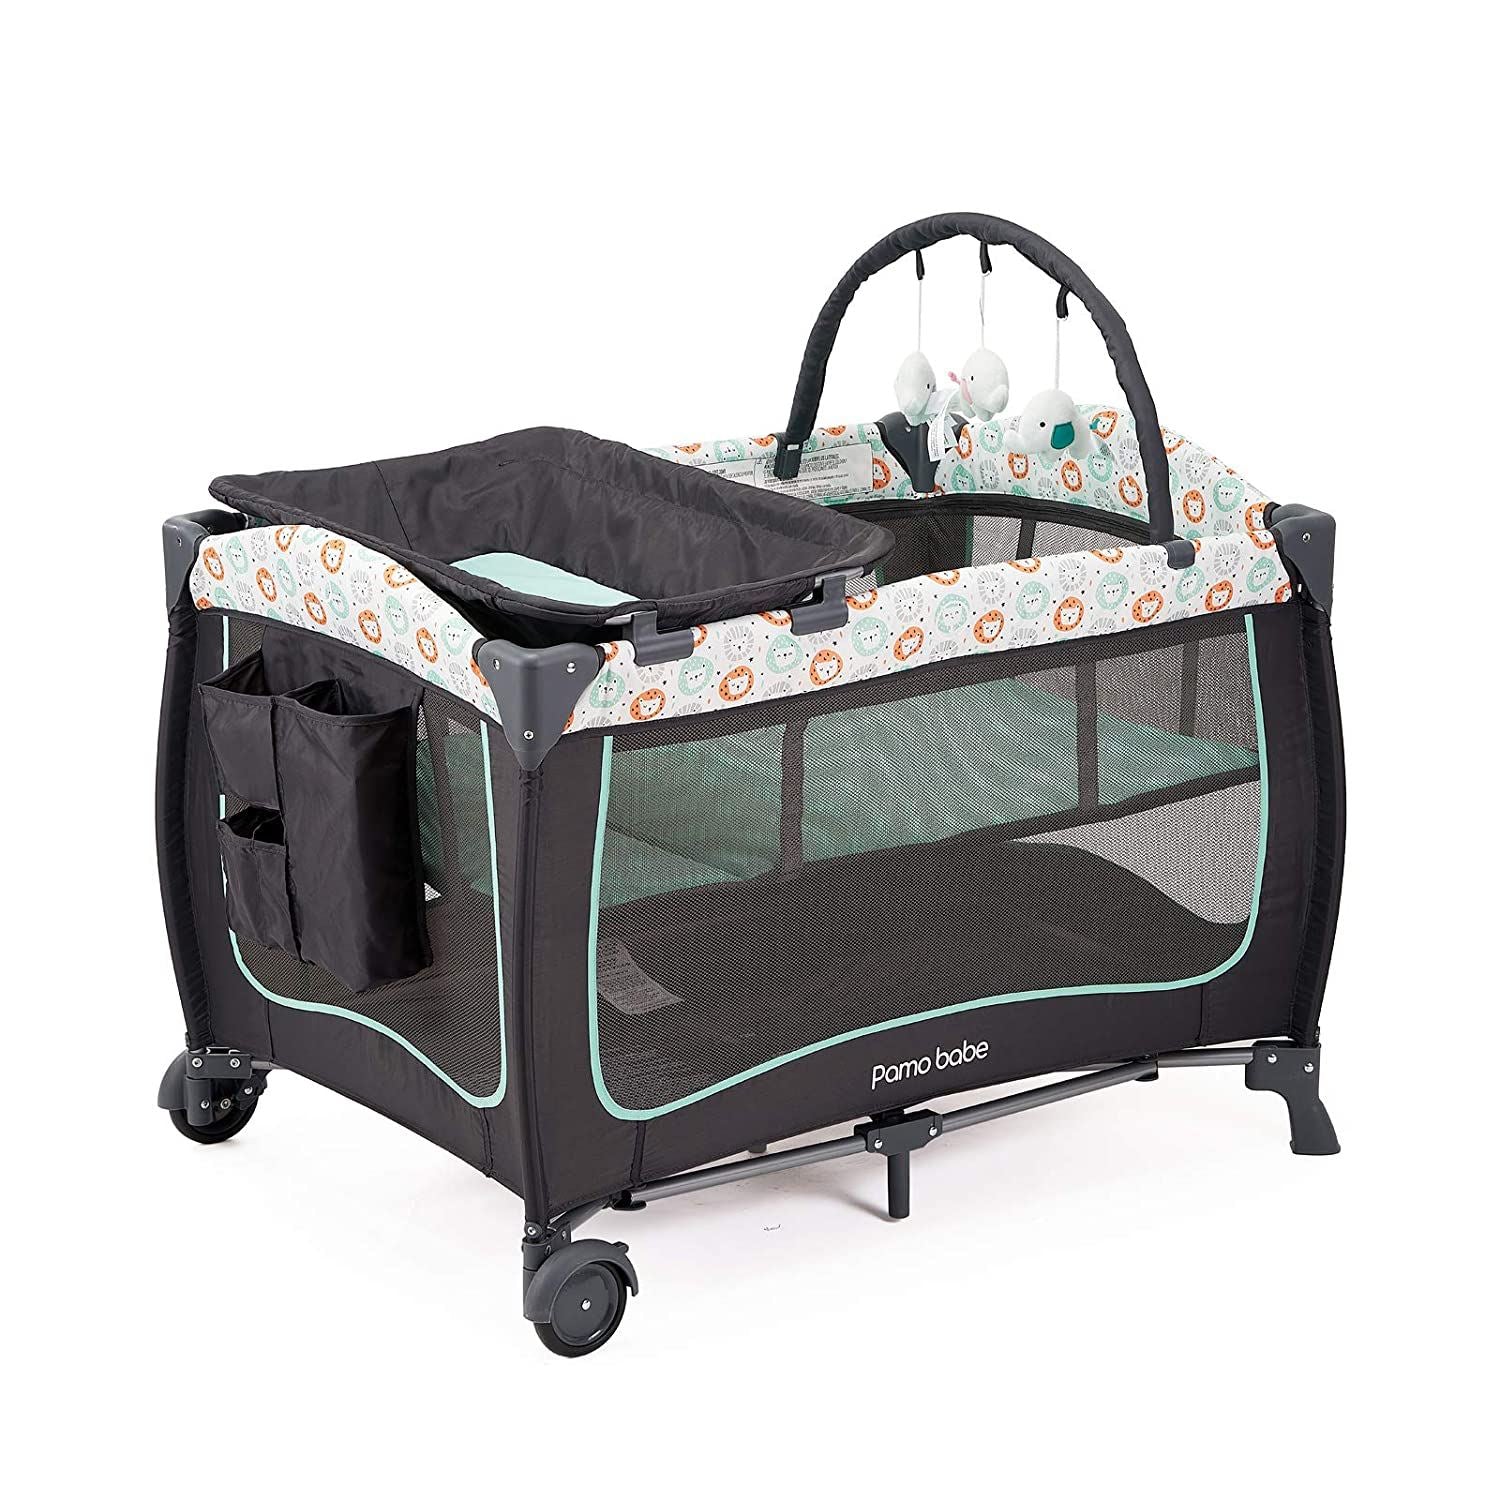 PMBabe™ 3-in-1 Play Yard & Nursery Center: Portable Bassinet, Changing Table, Toy Bar Play Yards PMBabe™ 